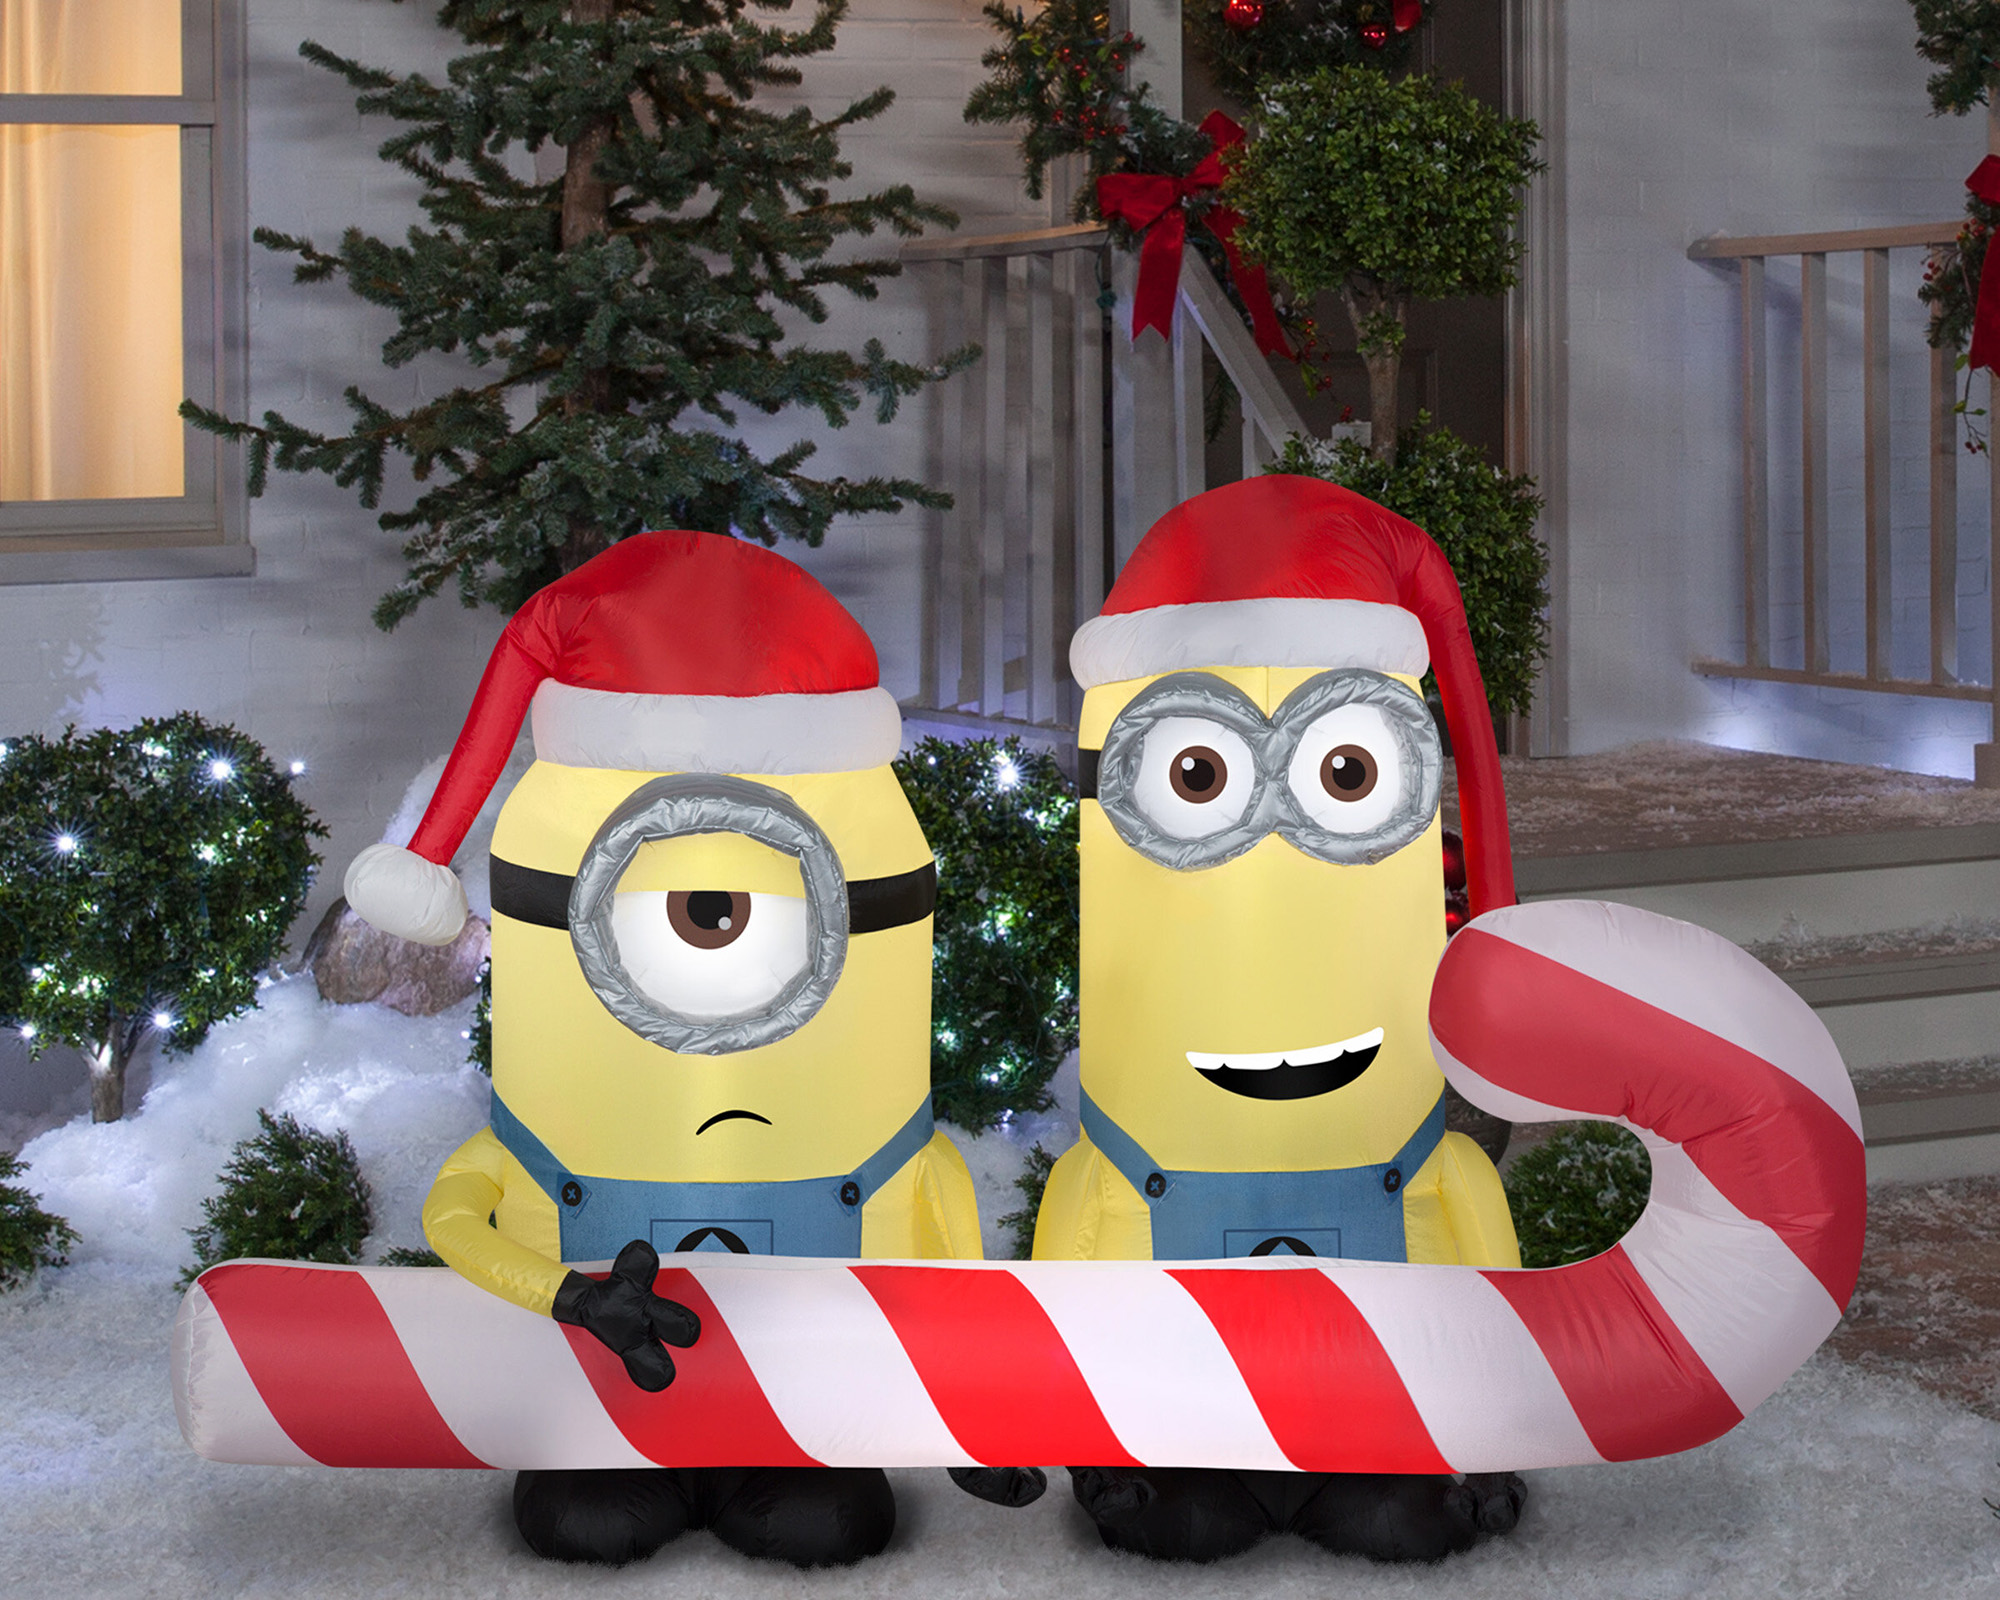 Two Minions carrying giant candy cane Christmas inflatable